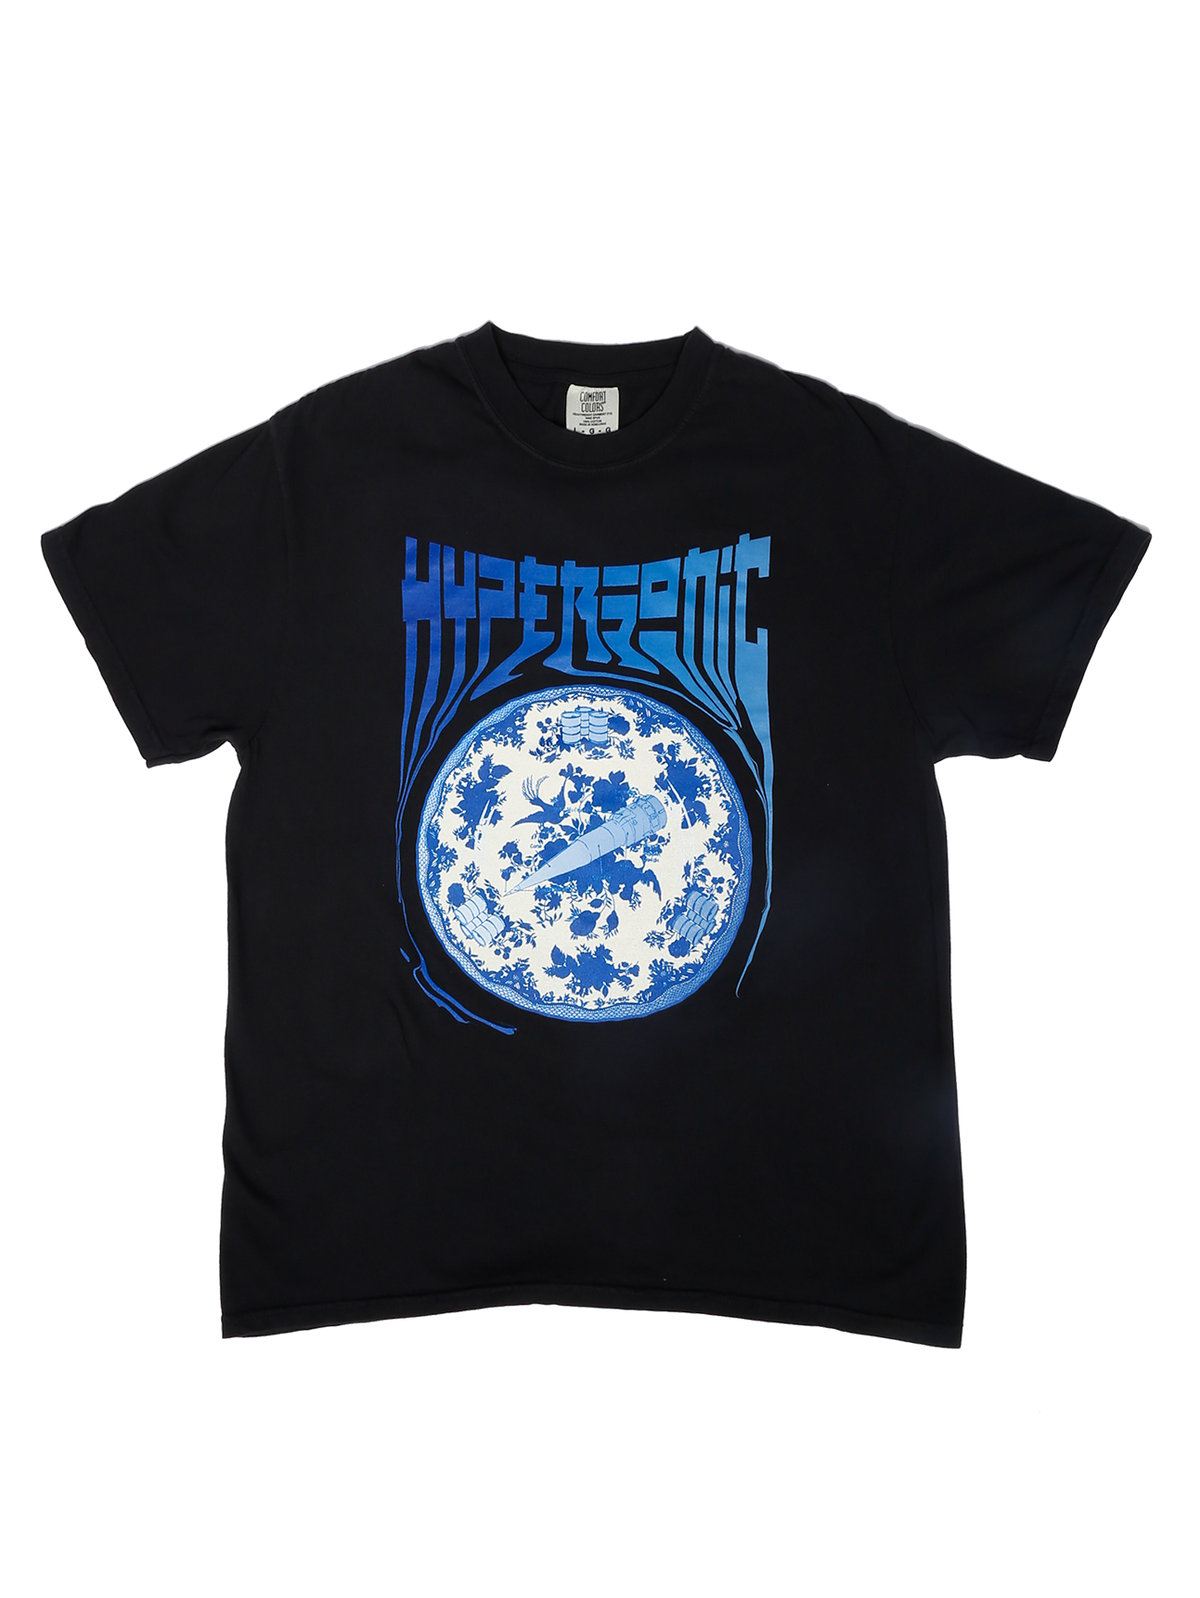 HYPERSONIC Shirt by Jeffrey From